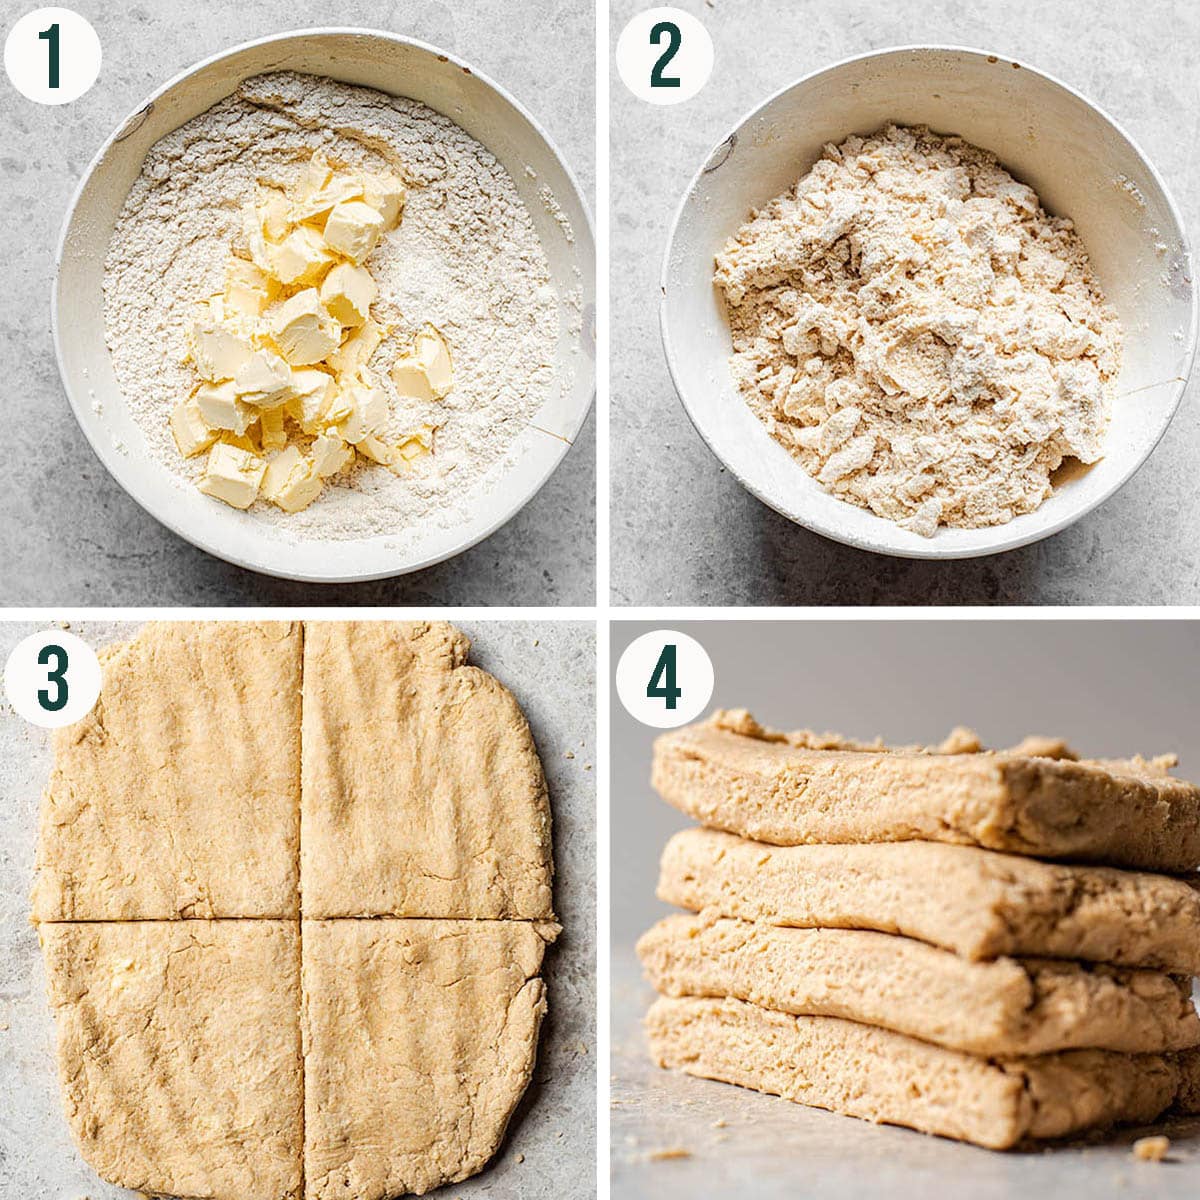 Biscuits steps 1 to 4, mixing the dough and rolling it out to layer the dough.